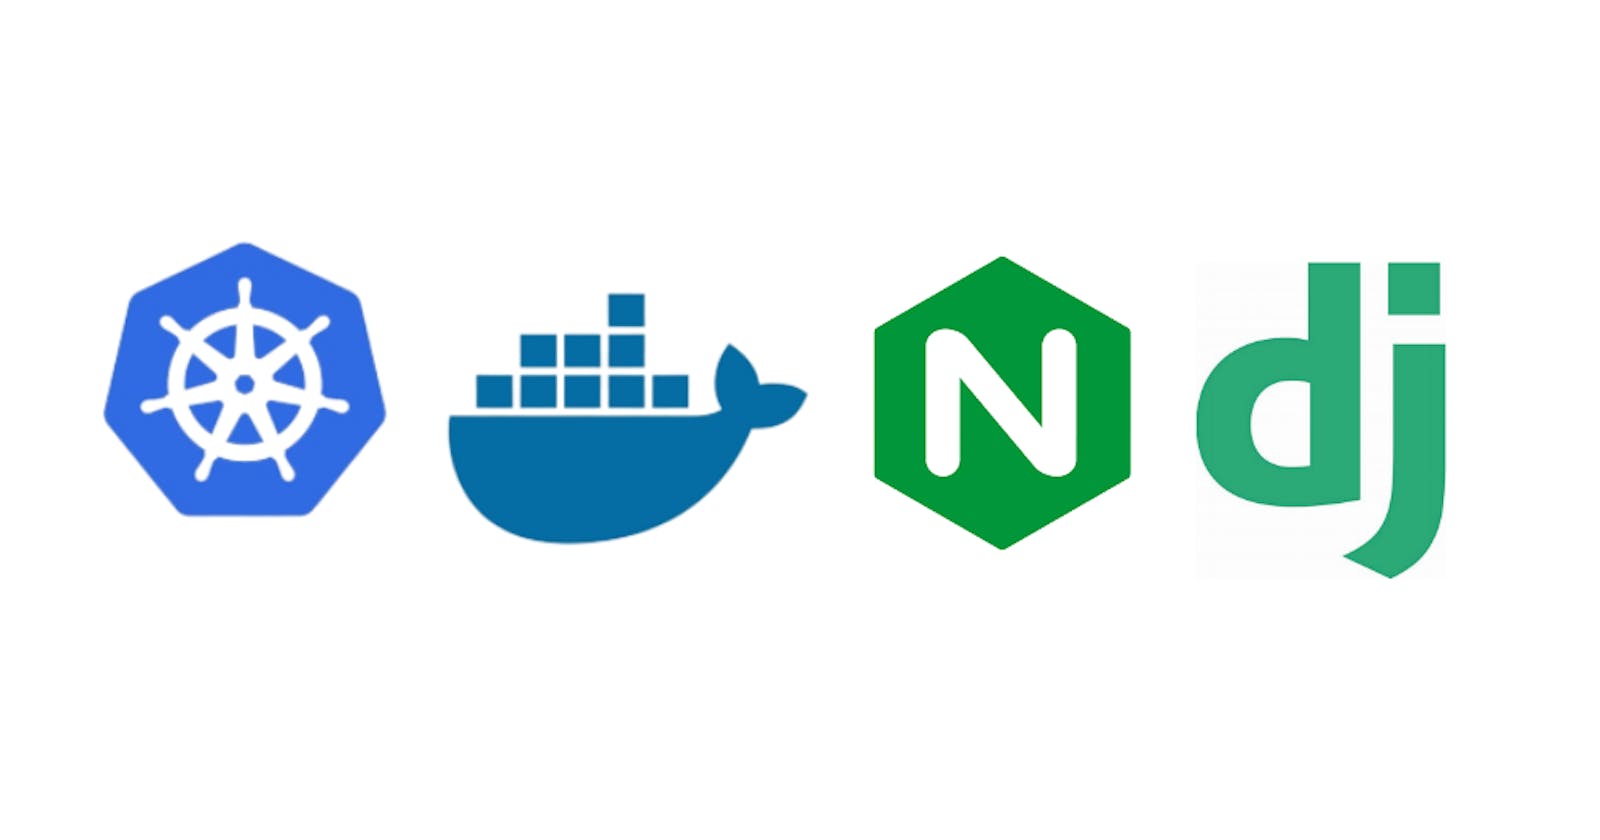 Deploying a Django App with Ingress for Multi-Path Routing on Kubernetes Pods